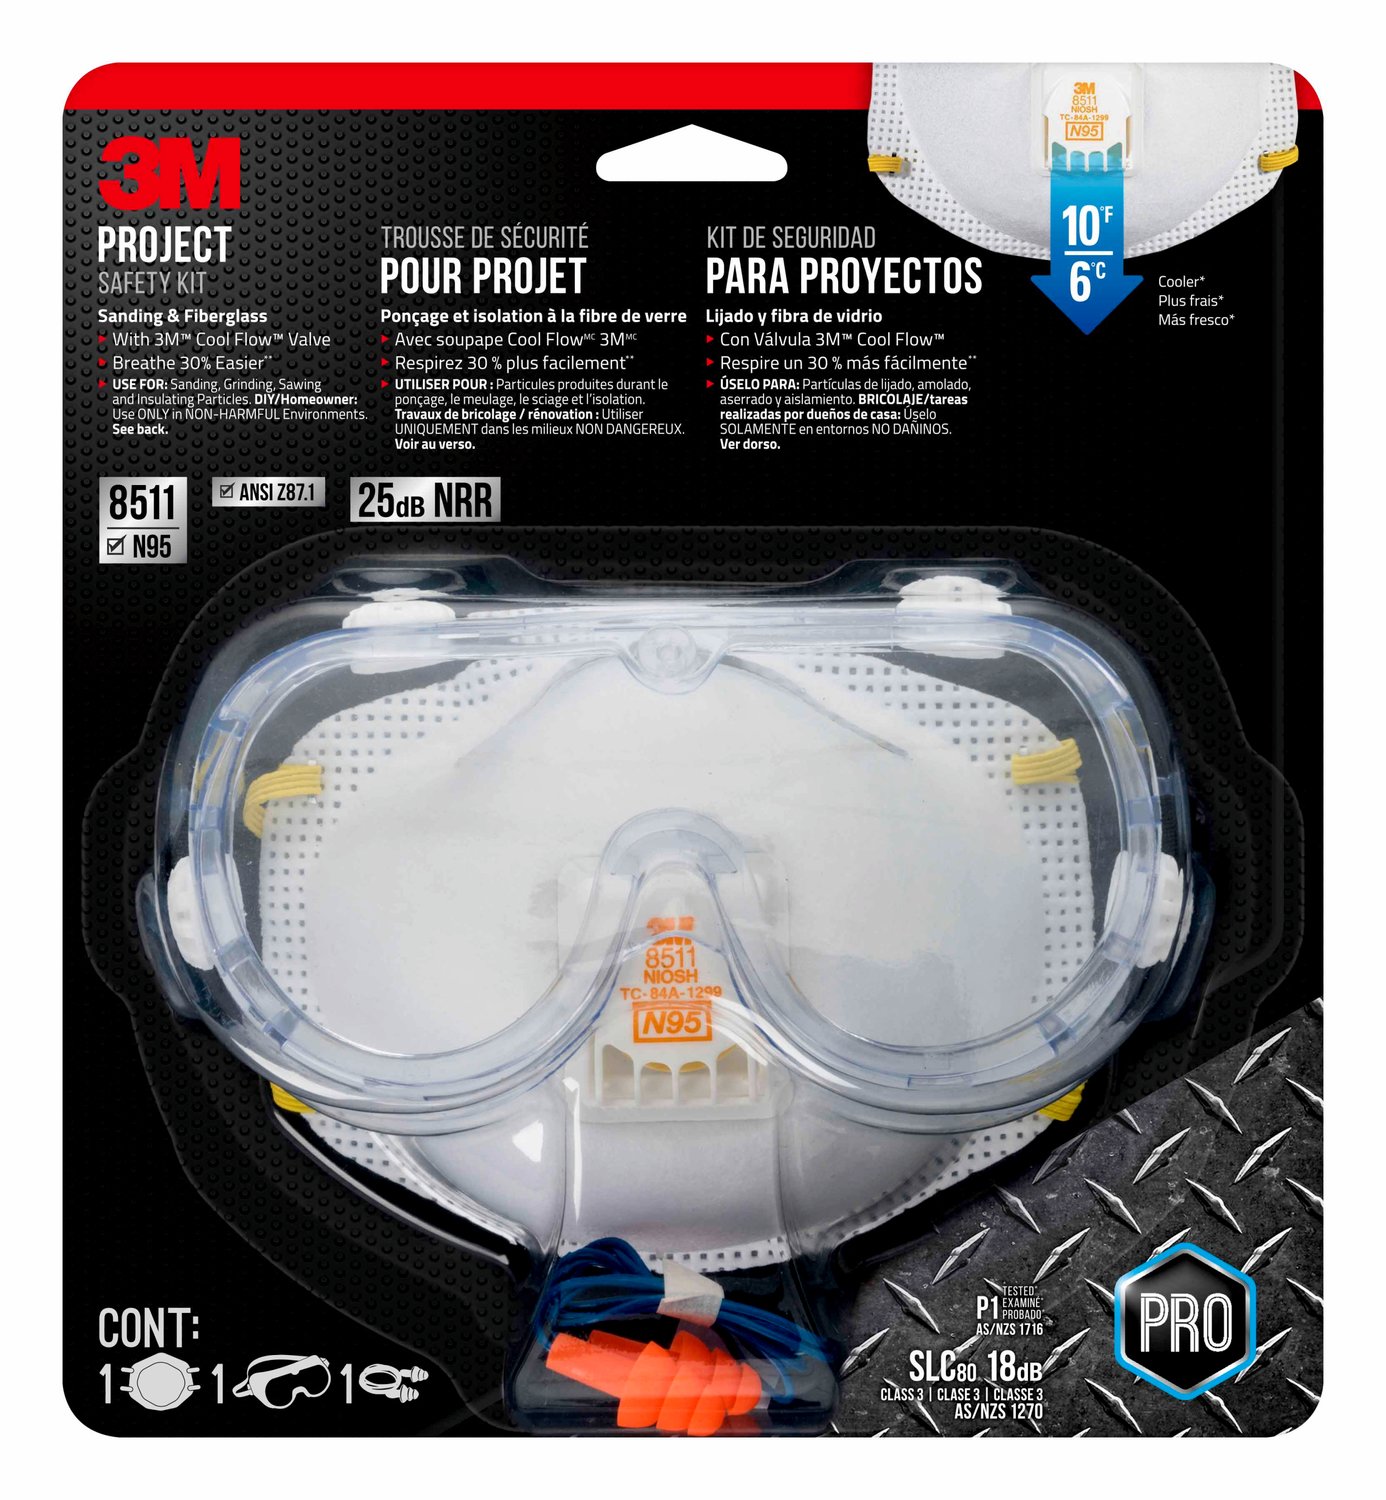 7100161409 - 3M Project Safety Kit with Valved Respirator, Project H1DC-PS, 6/case